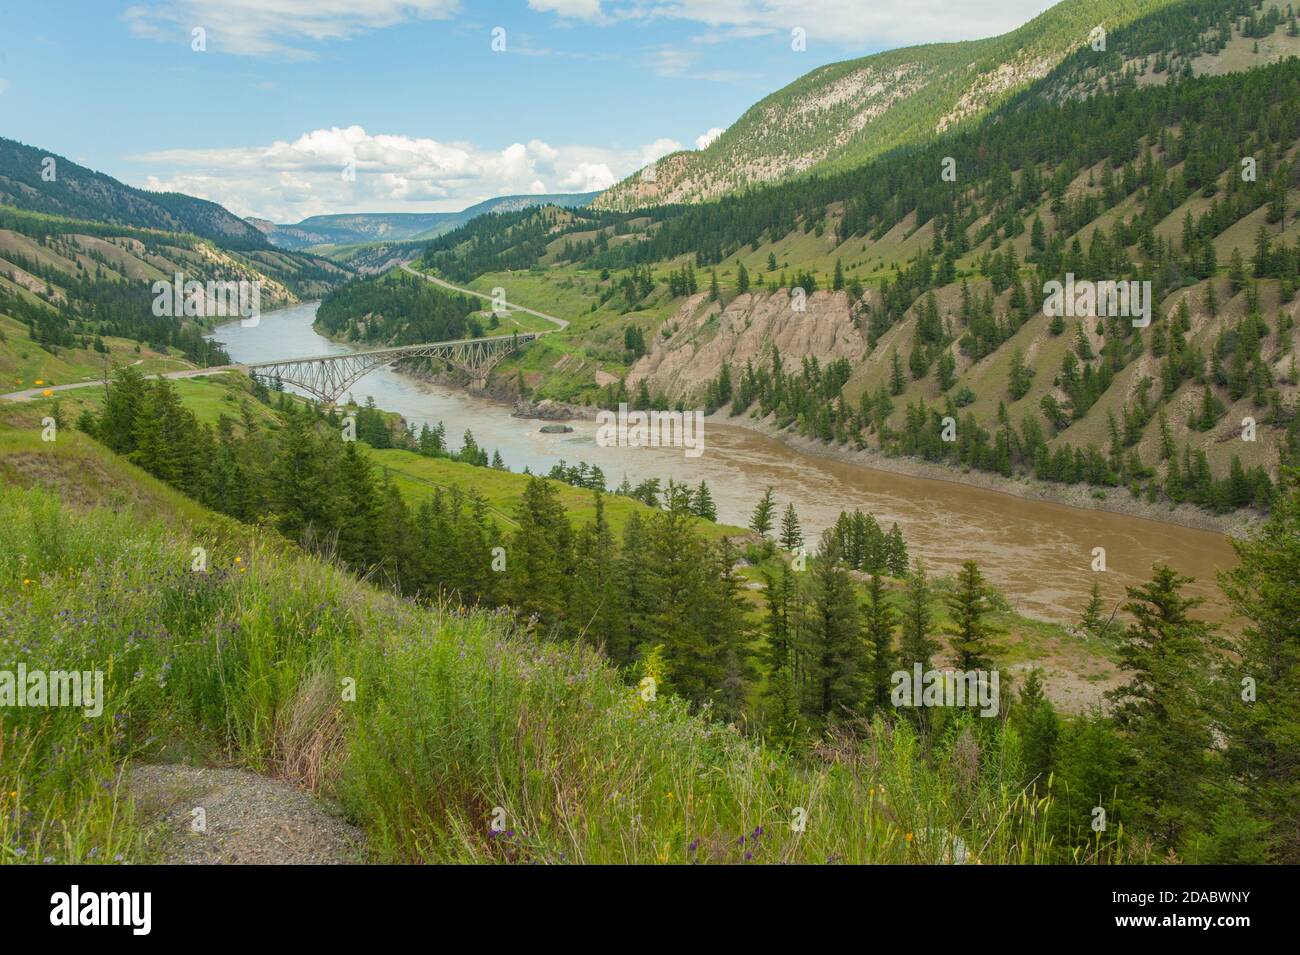 Scenic view of the bridge over the Fraser River. The bridge offer a breathtaking view of the canyon, a dry landscape in the shadow of the mountains. Stock Photo